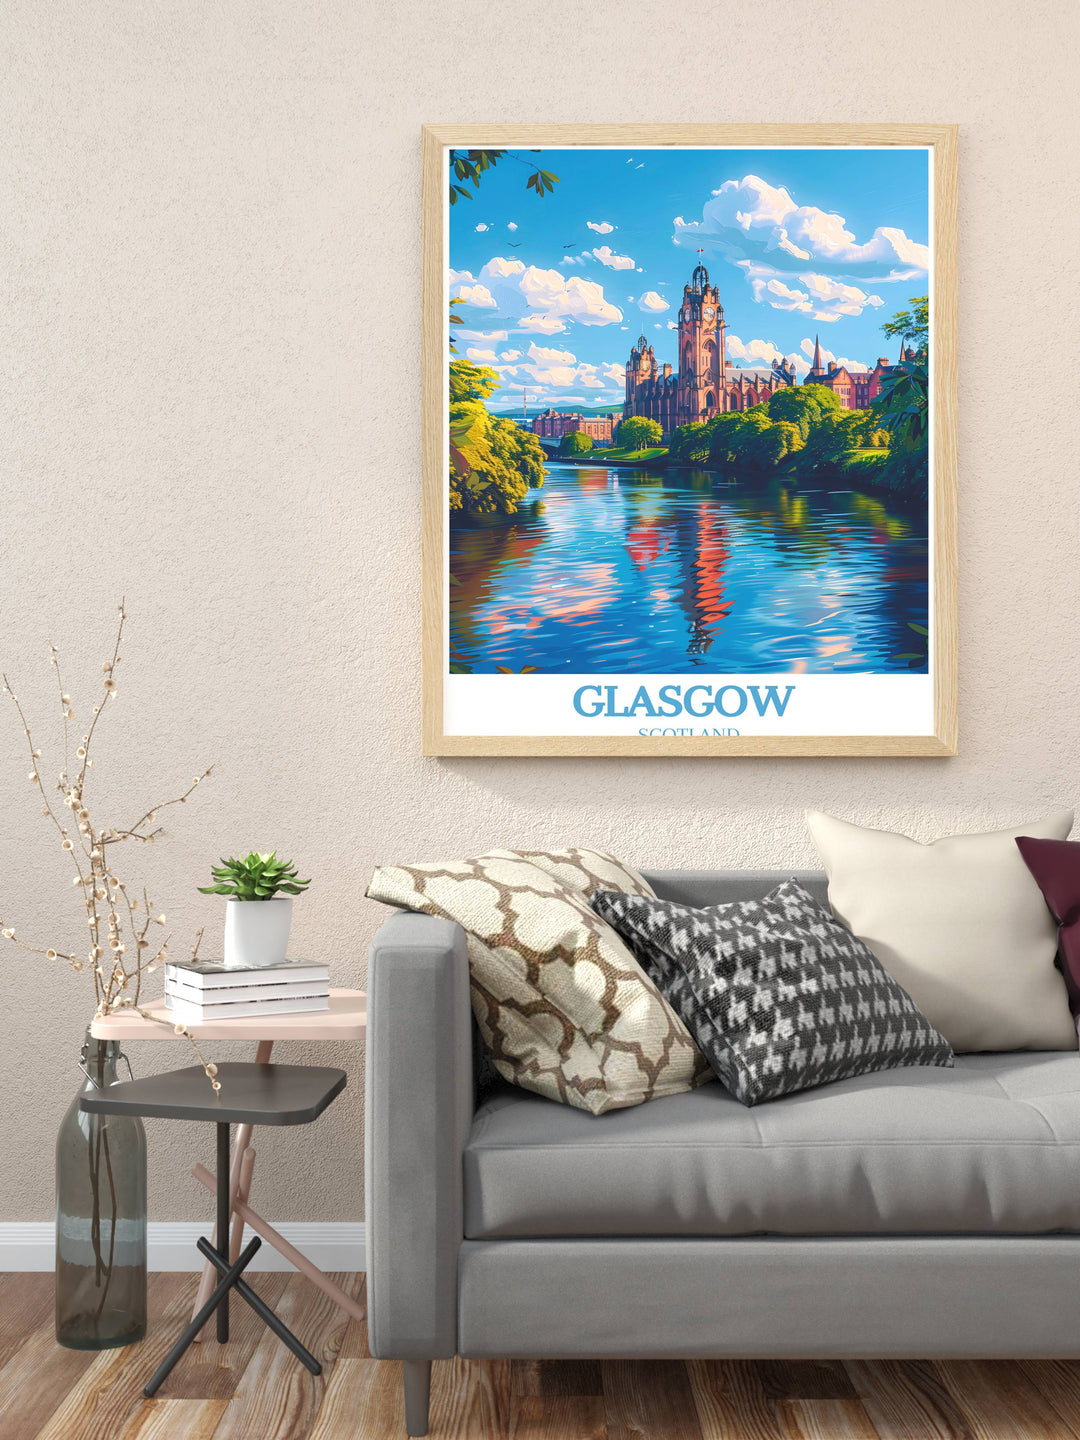 Elevate your decor with elegant prints evoking Glasgows allure and character, adding sophistication to any space.